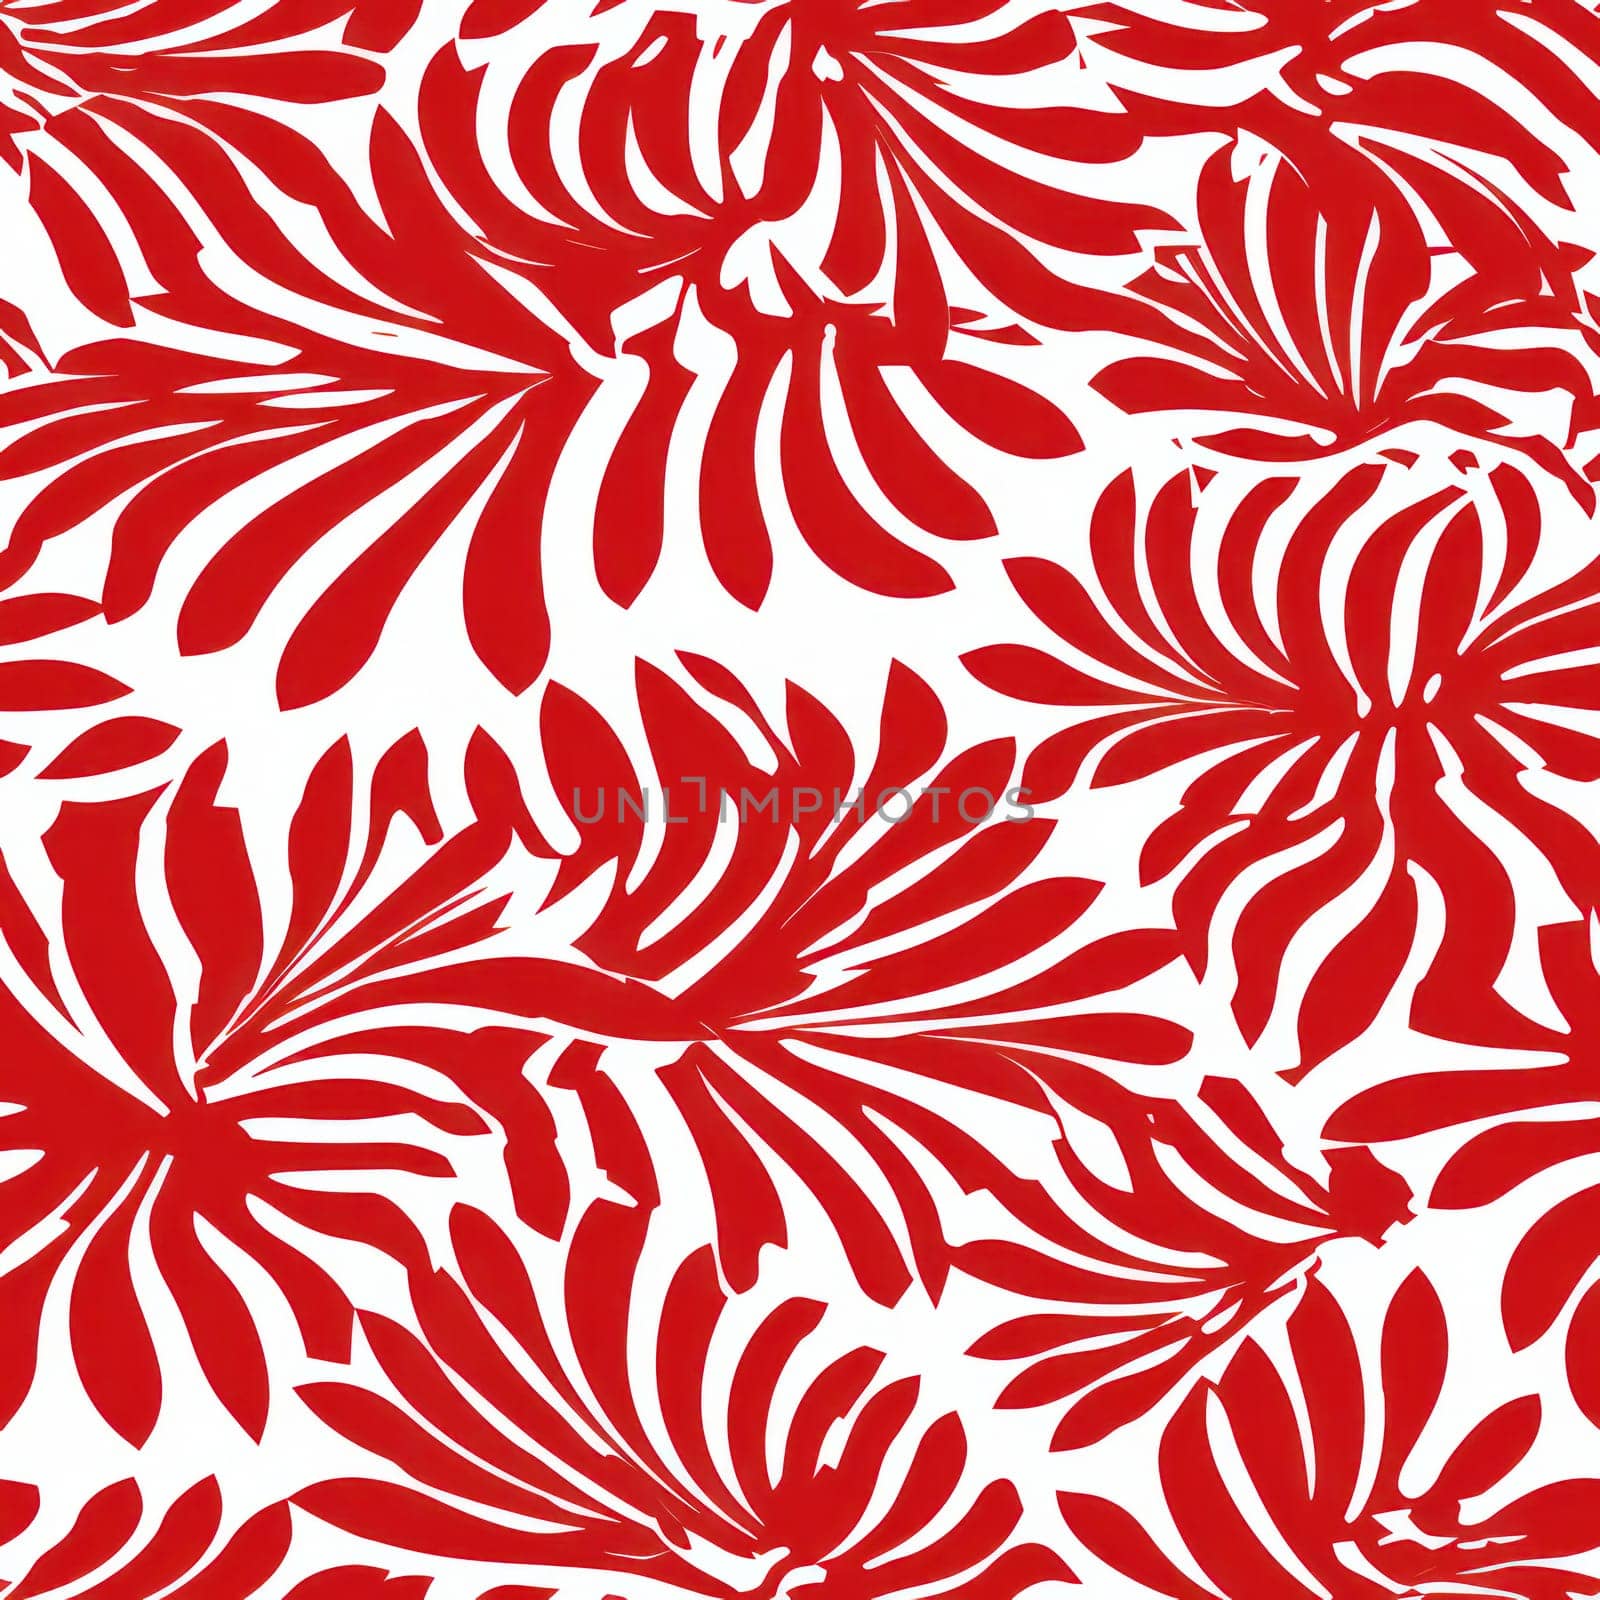 Tropic Summer Pattern: Nature's Seamless Background of Textured Design Illustration of Leaves on Fabric.